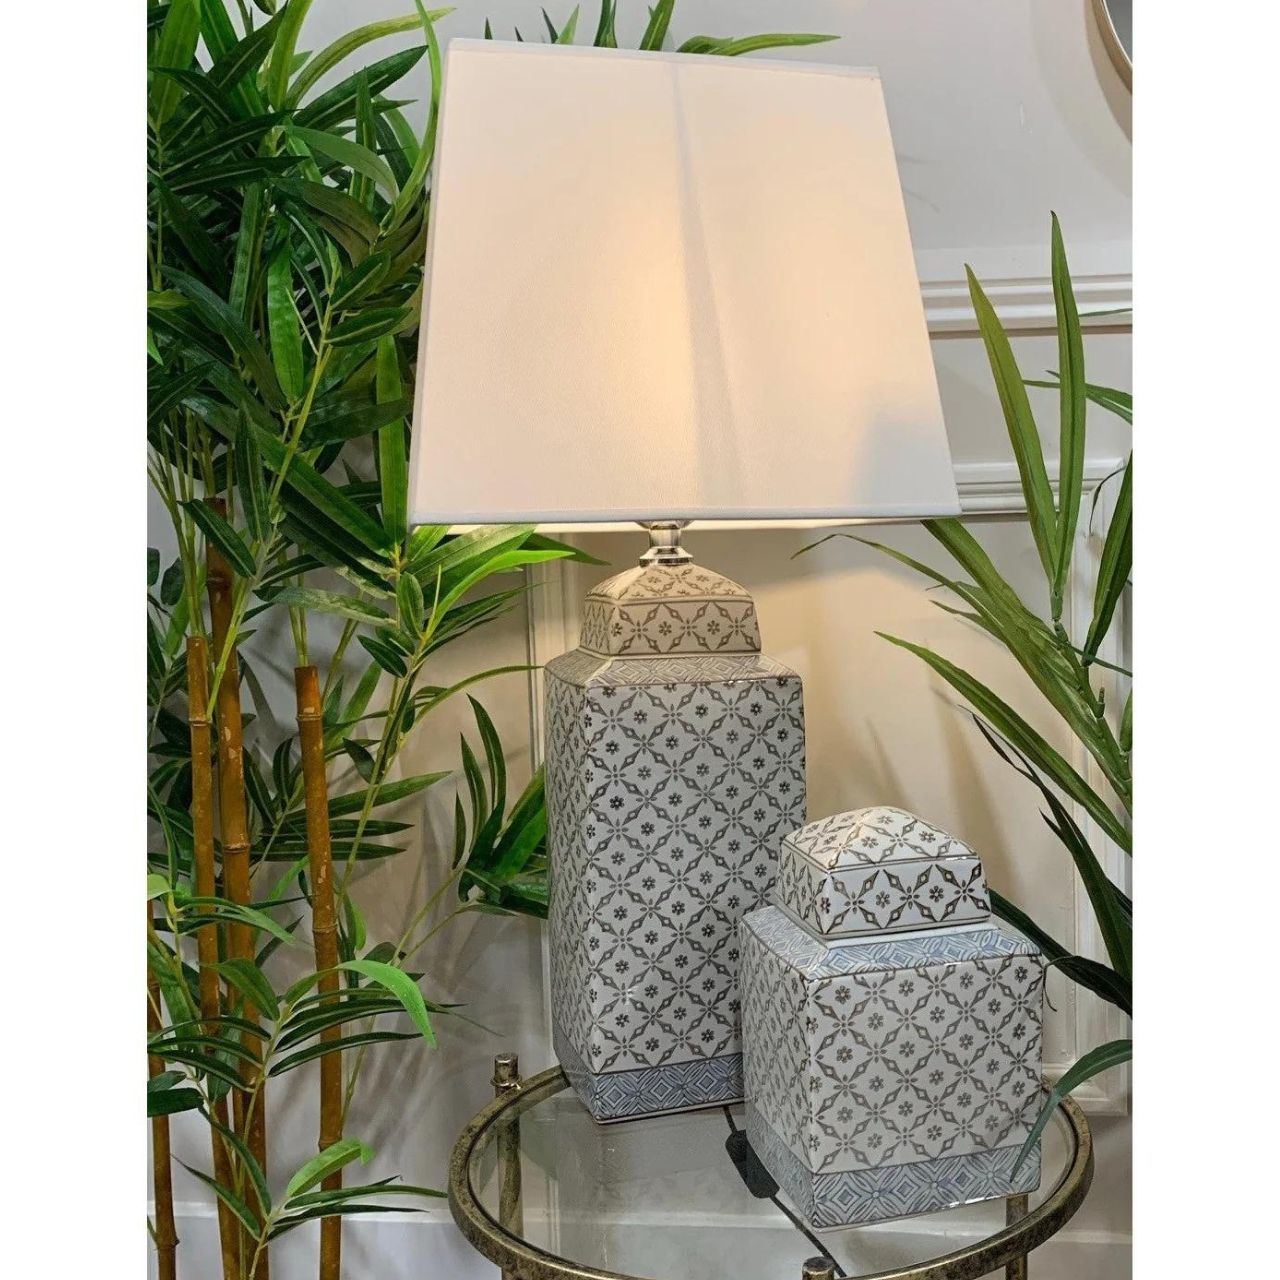 Lyon Lamp by Mindy Brownes  - A neutral grey colourway featuring geometric lines. - White square linen shade. - This lamp is stunning styled as a bedroom lamp or living room lamp.